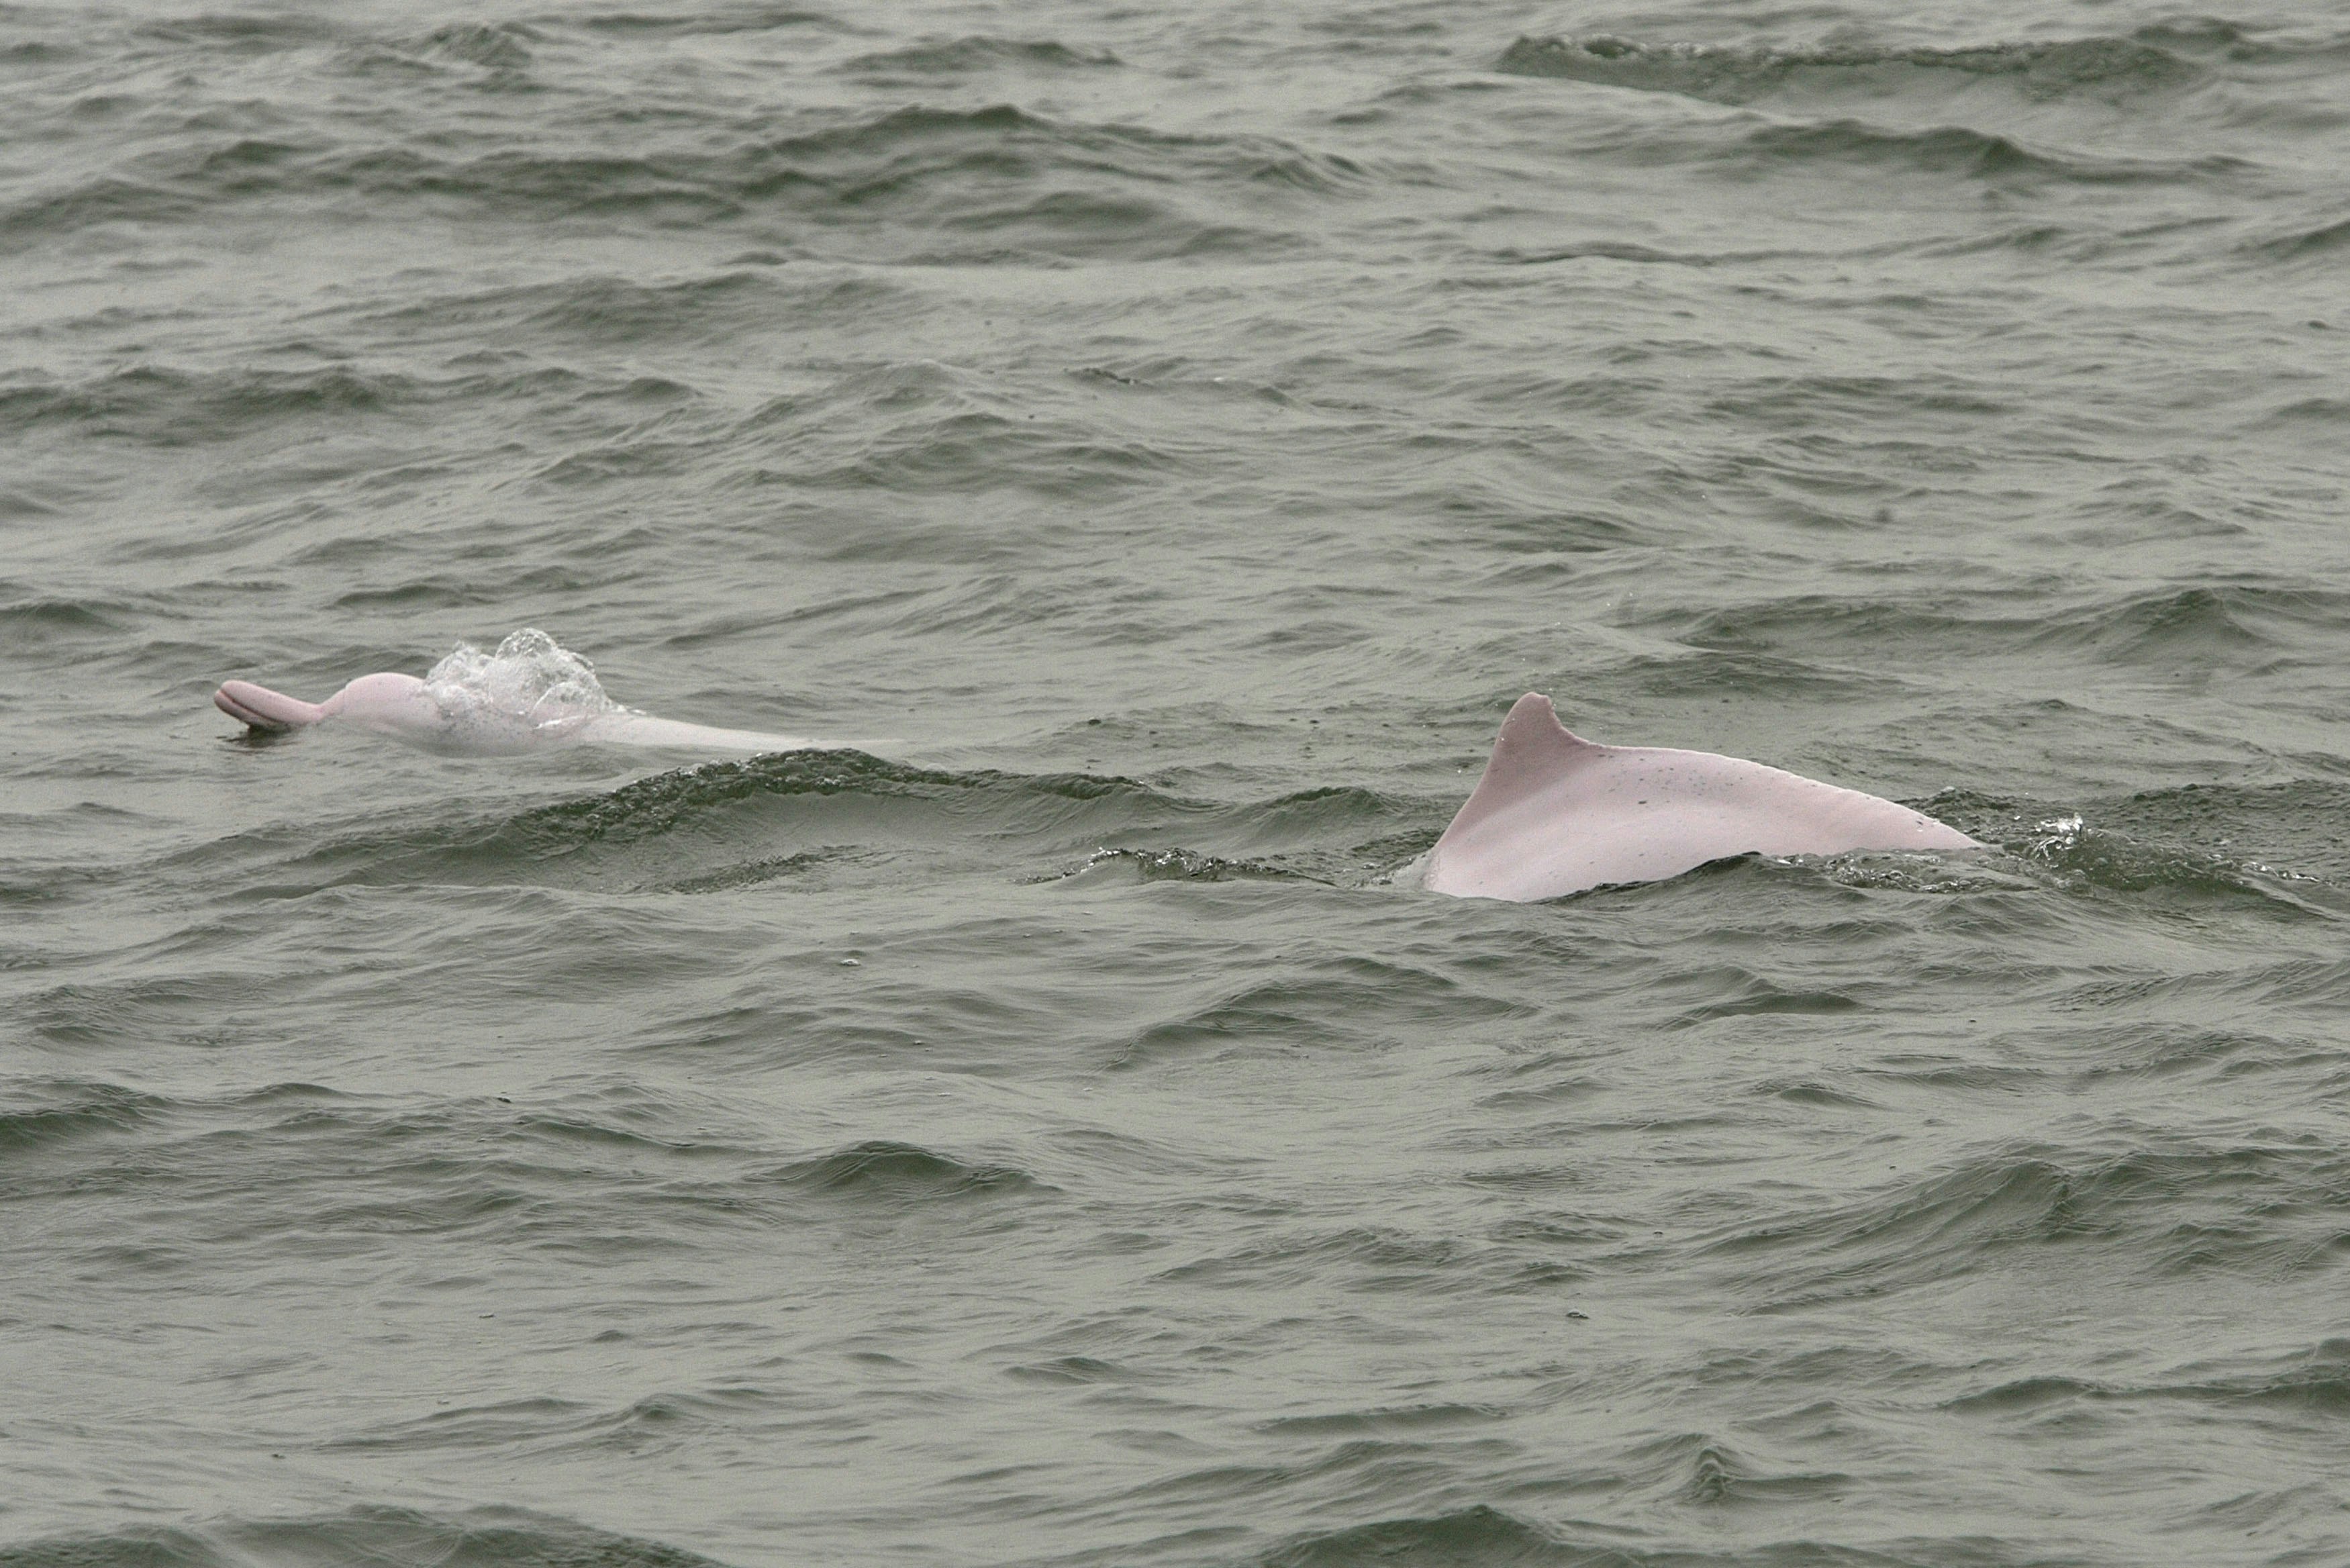 Chinese pink dolphins swim off the northern shore of Lantau